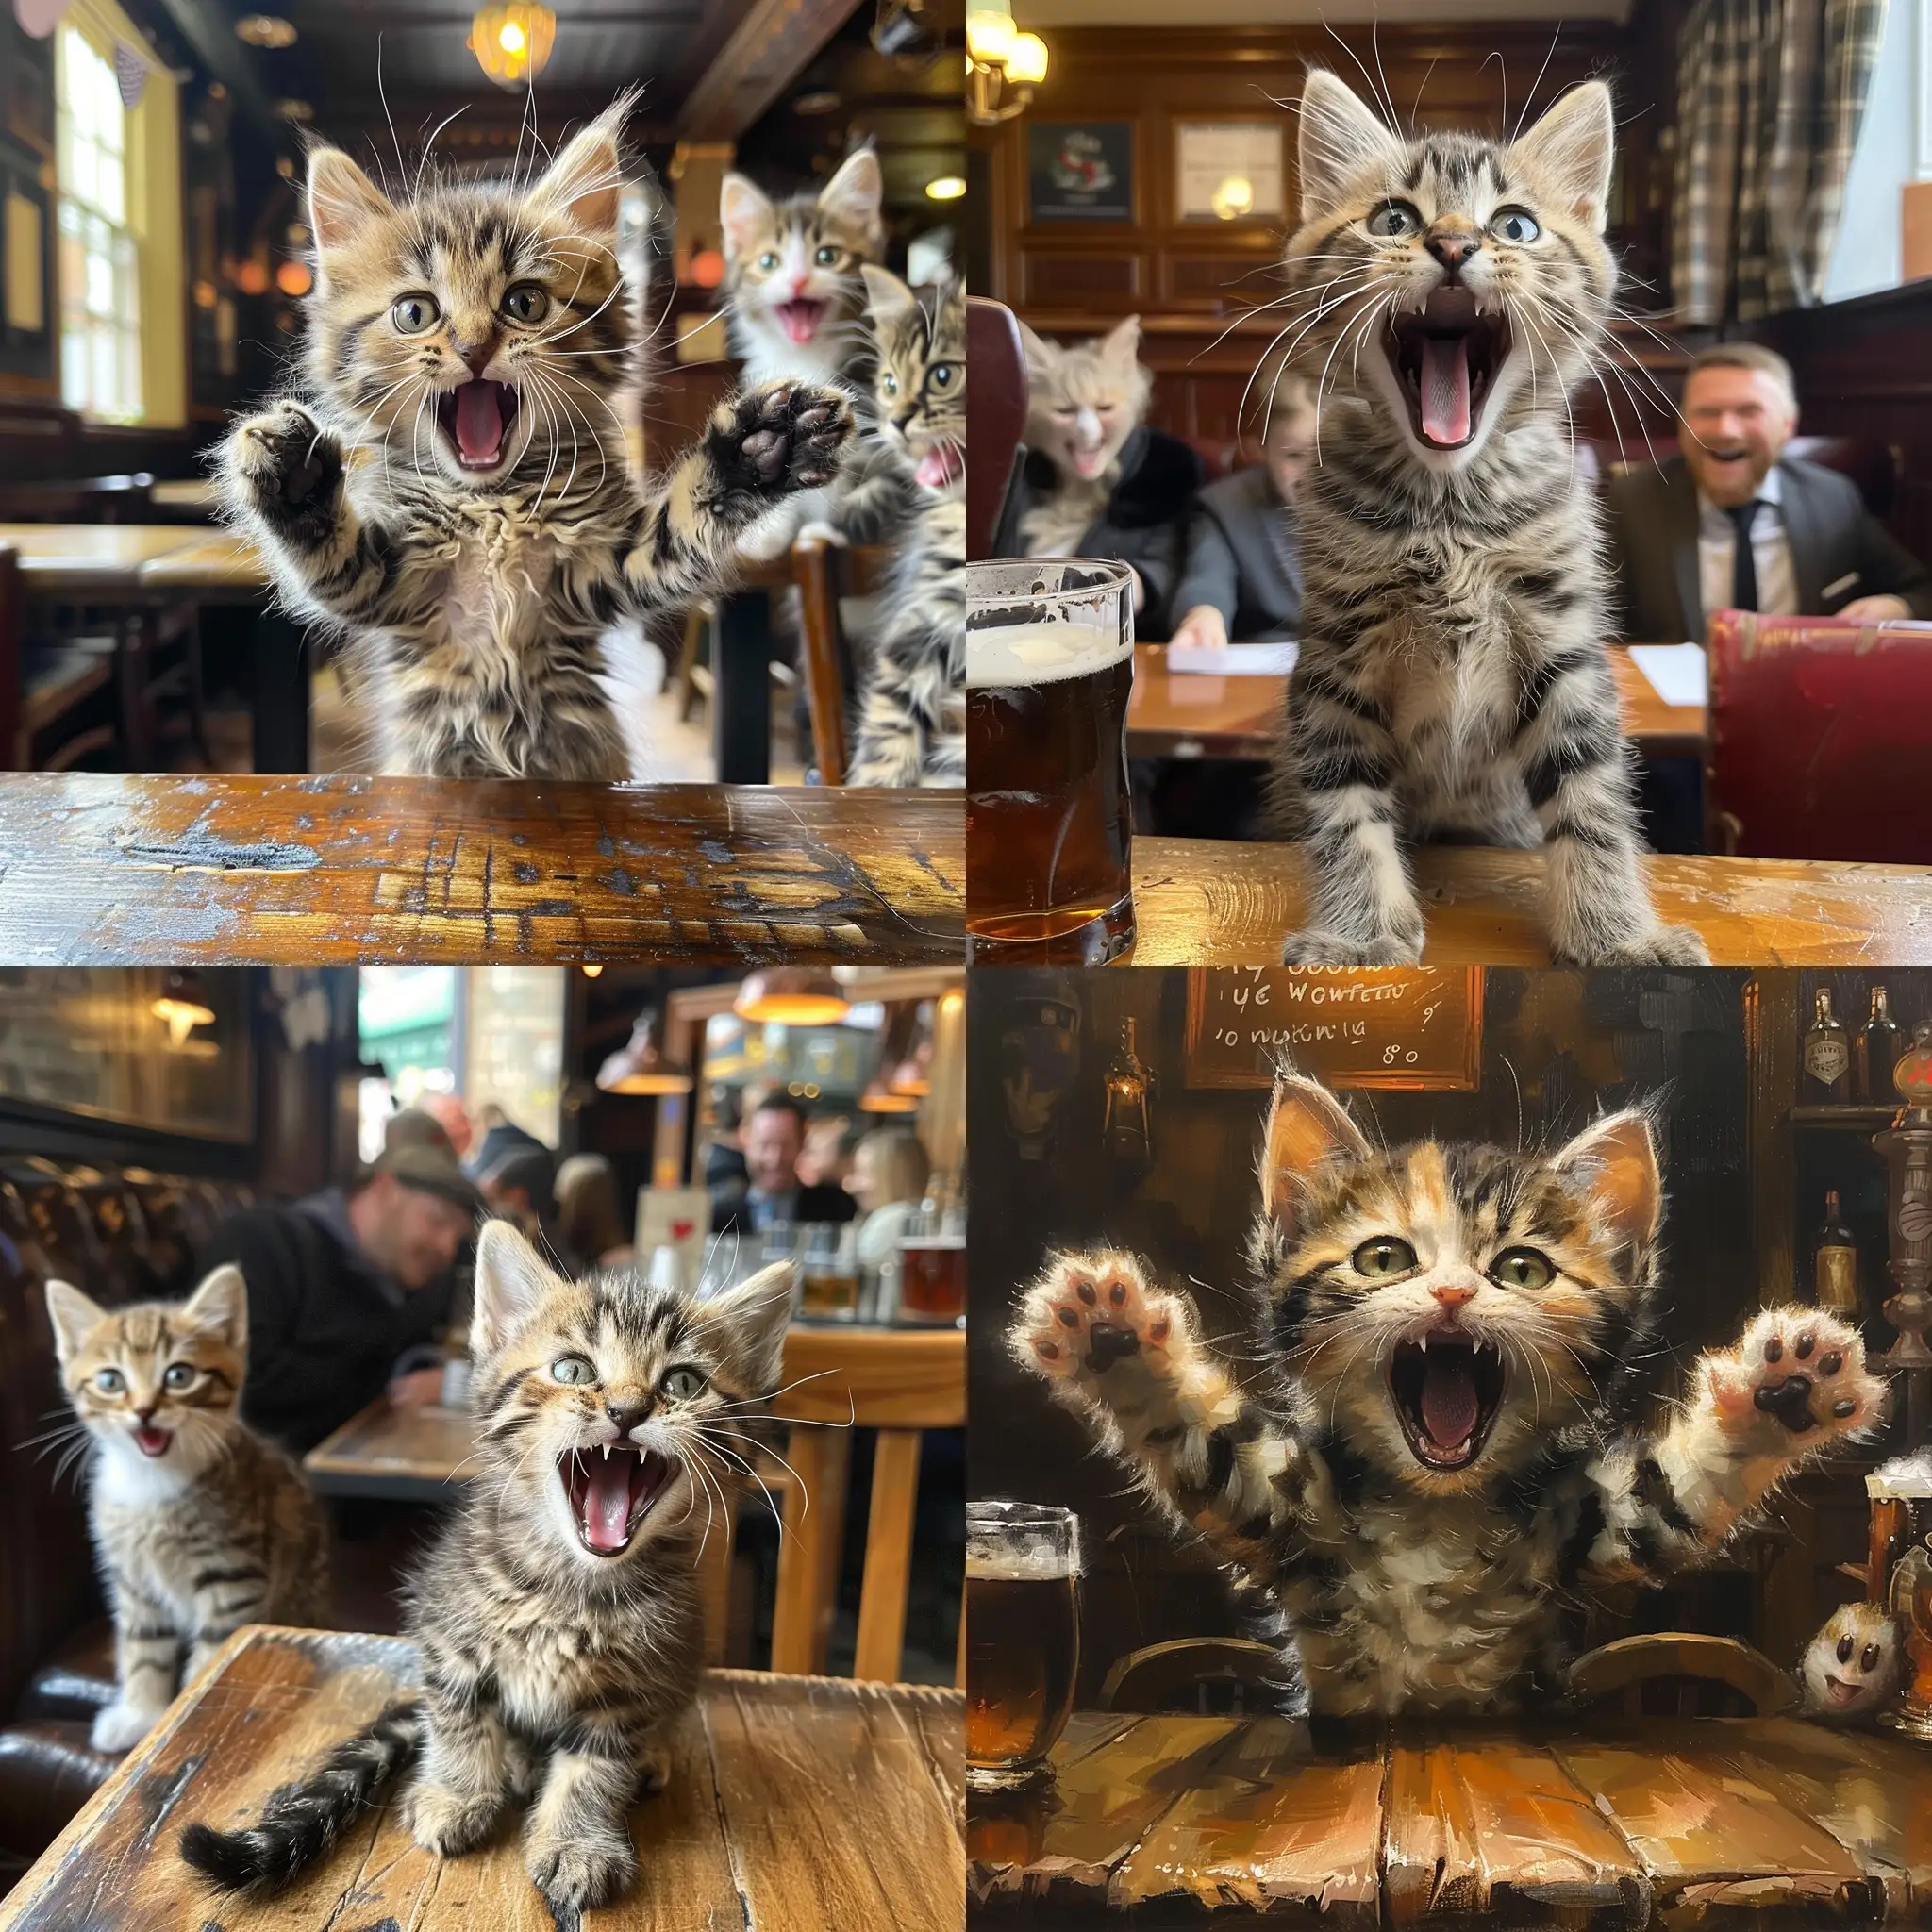 An excited kitten who just received good news and a promotion at work. It's celebrating with friends at a pub